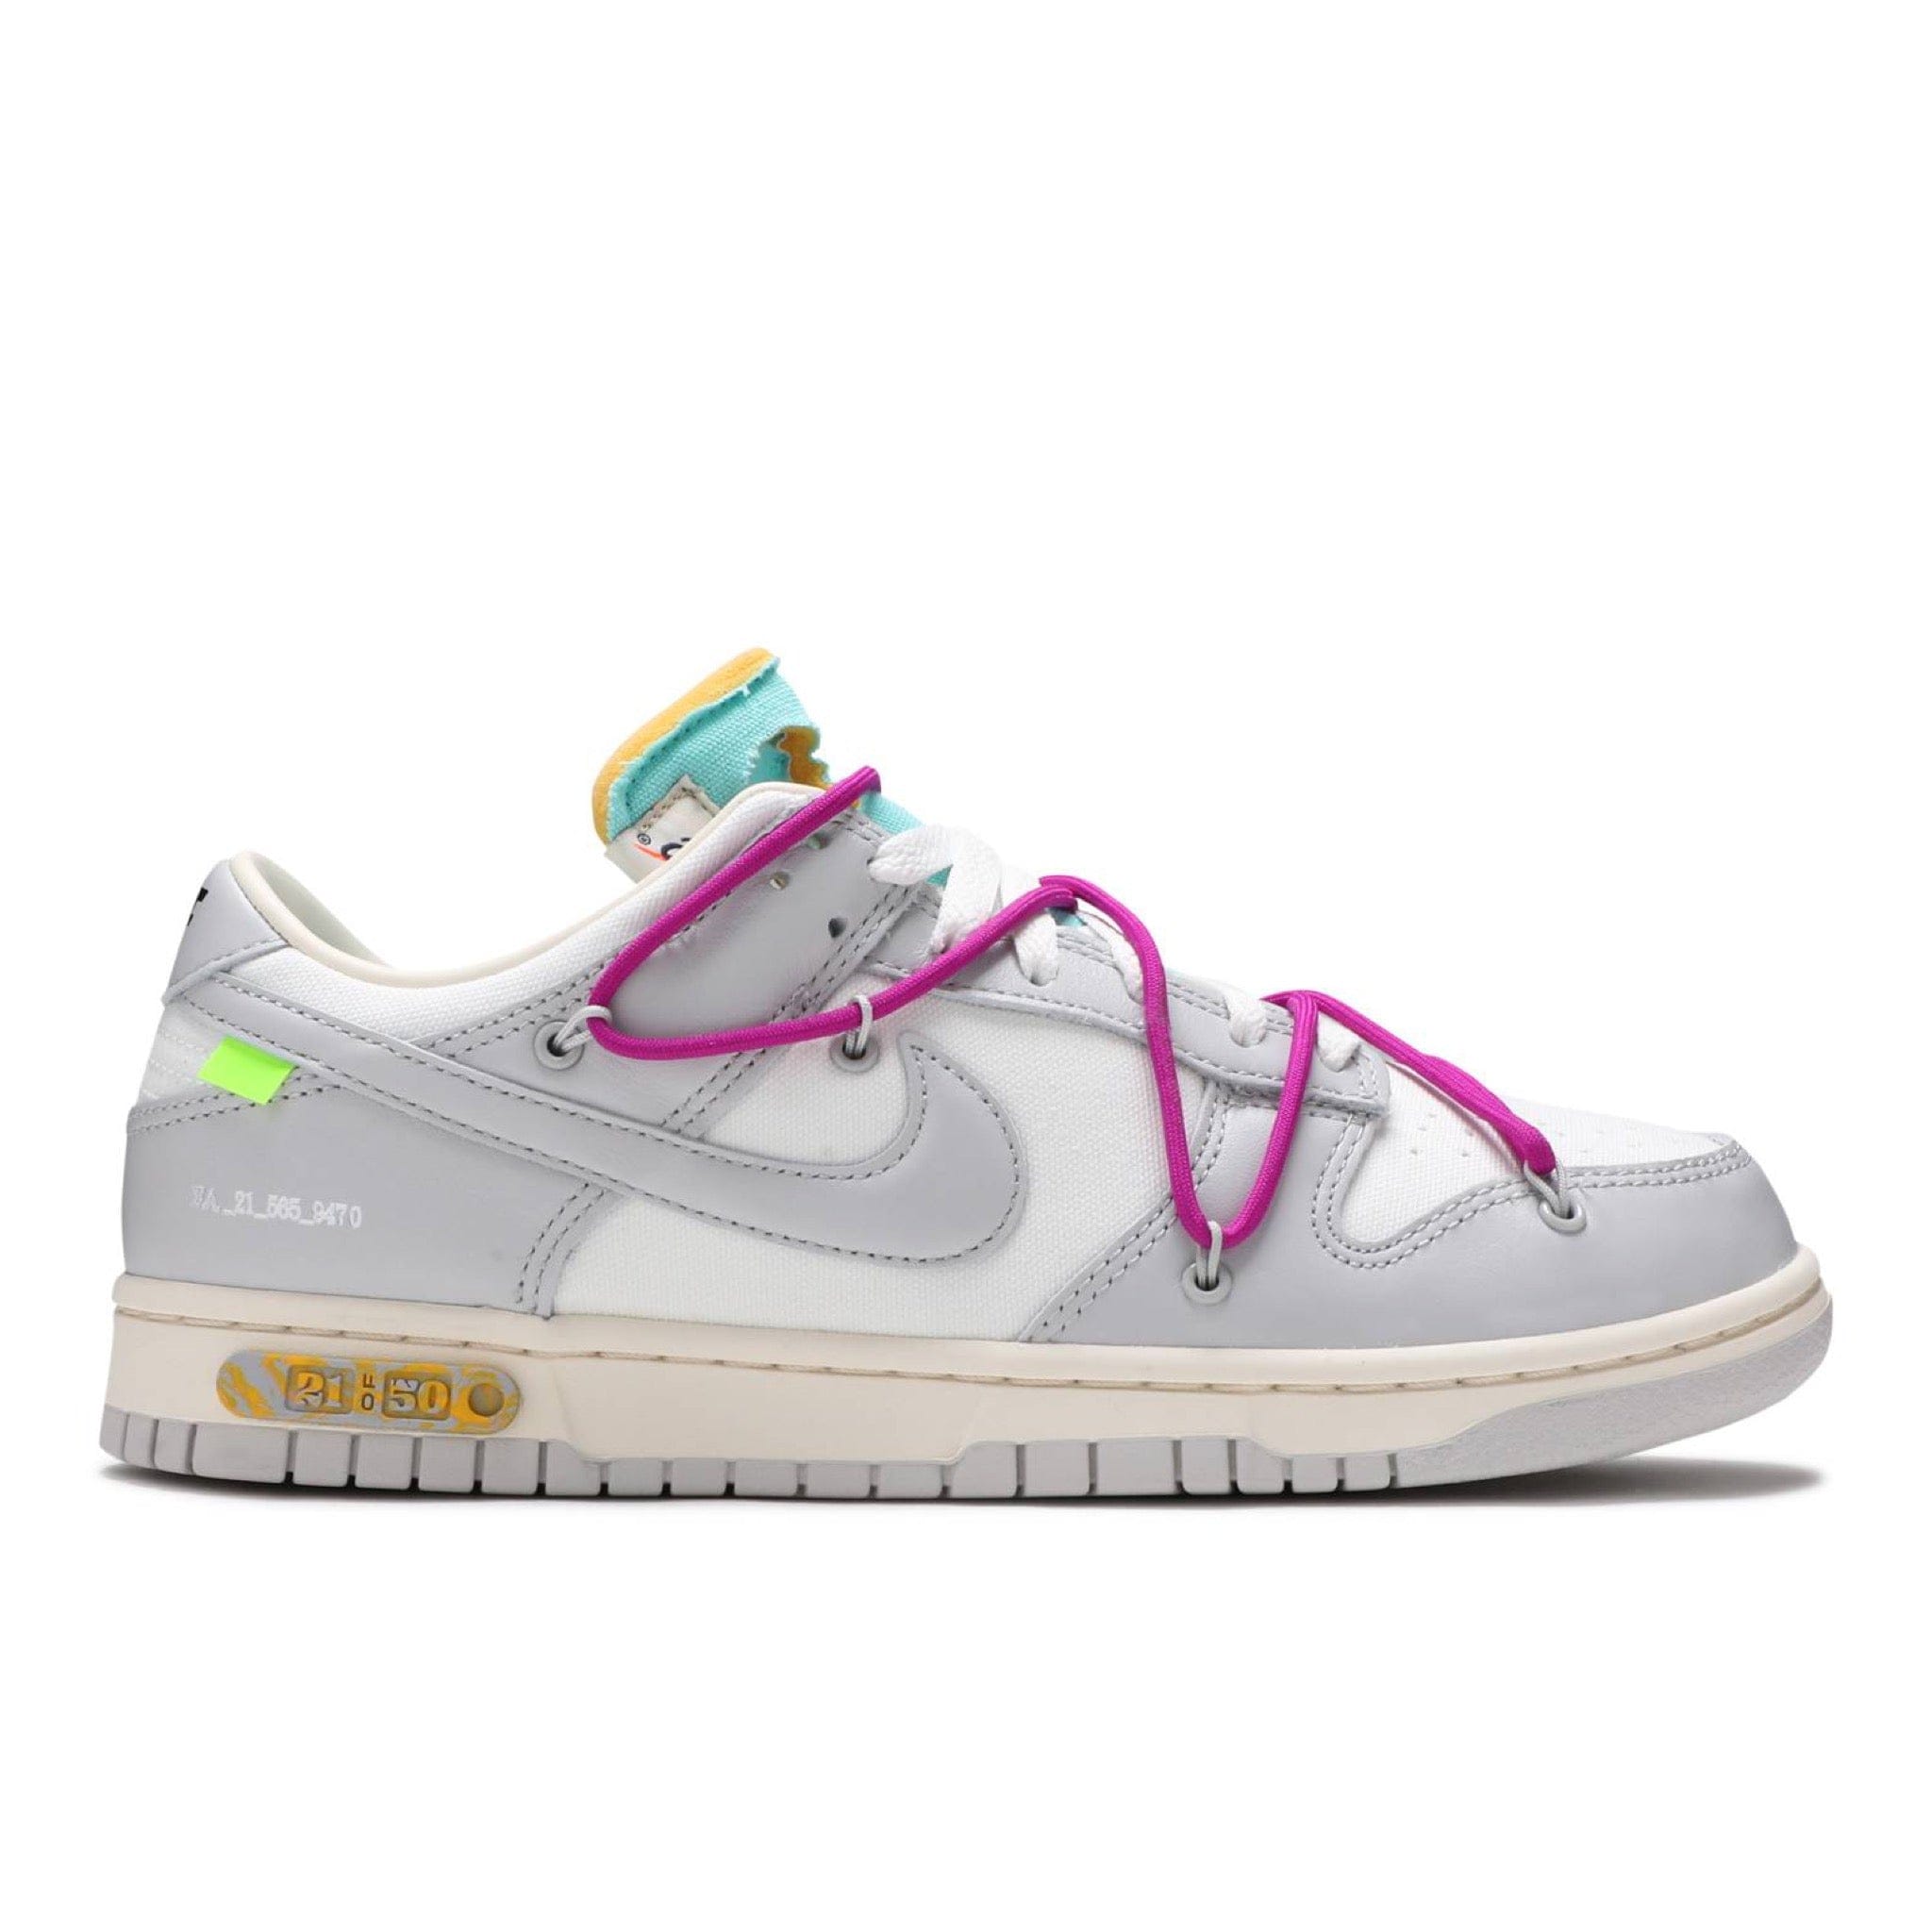 NIKE DUNK LOW OFF-WHITE LOT 21 OF 50